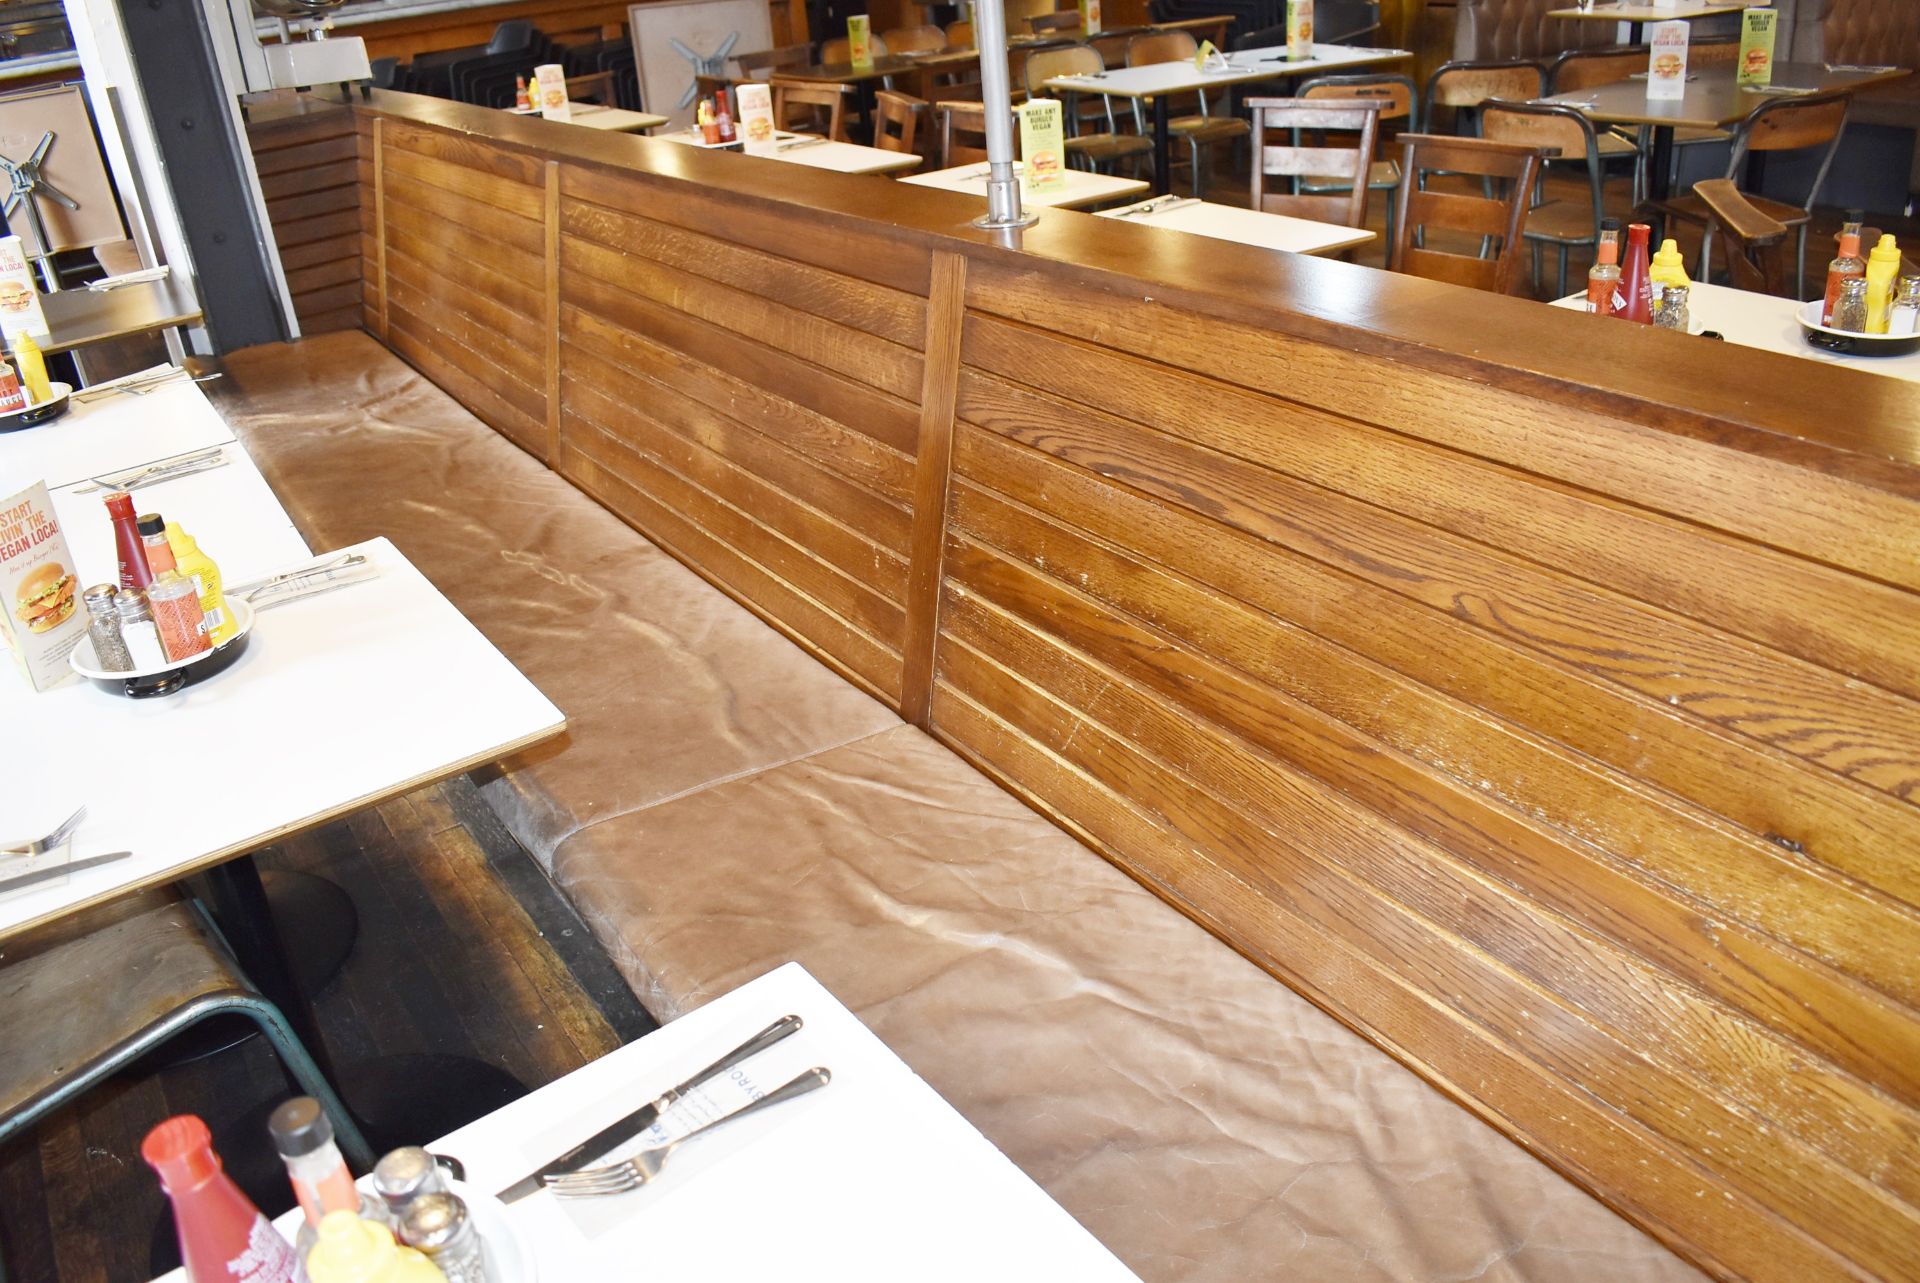 1 x Back to Back 23ft Seating Bench With Slatted Wood Backs and Brown Leather Seat Pads - Image 9 of 13